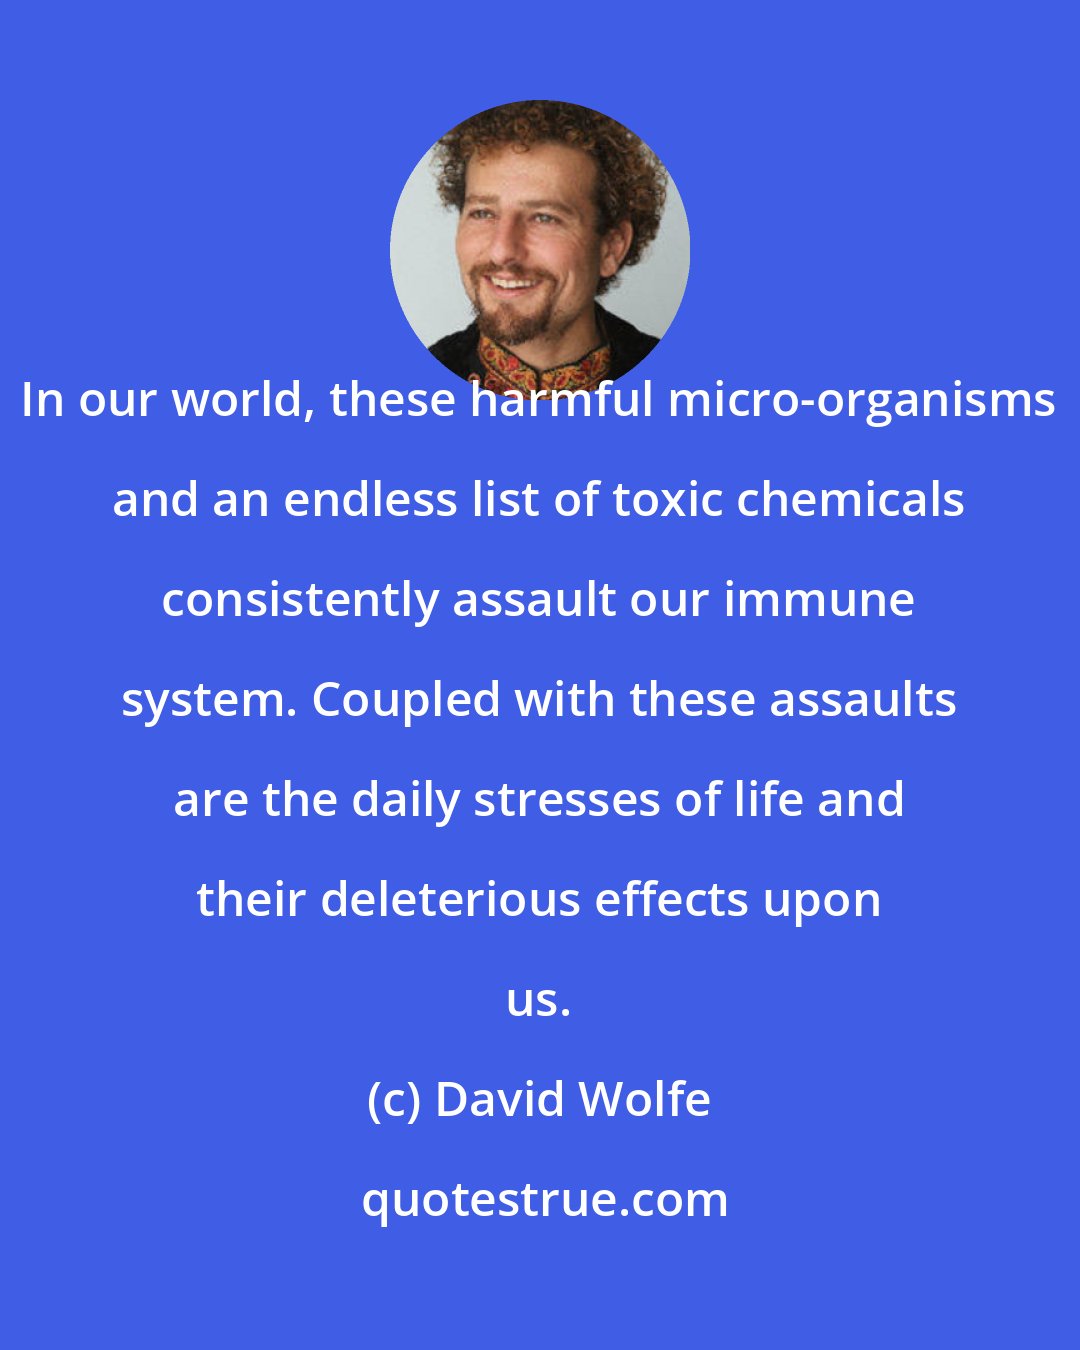 David Wolfe: In our world, these harmful micro-organisms and an endless list of toxic chemicals consistently assault our immune system. Coupled with these assaults are the daily stresses of life and their deleterious effects upon us.